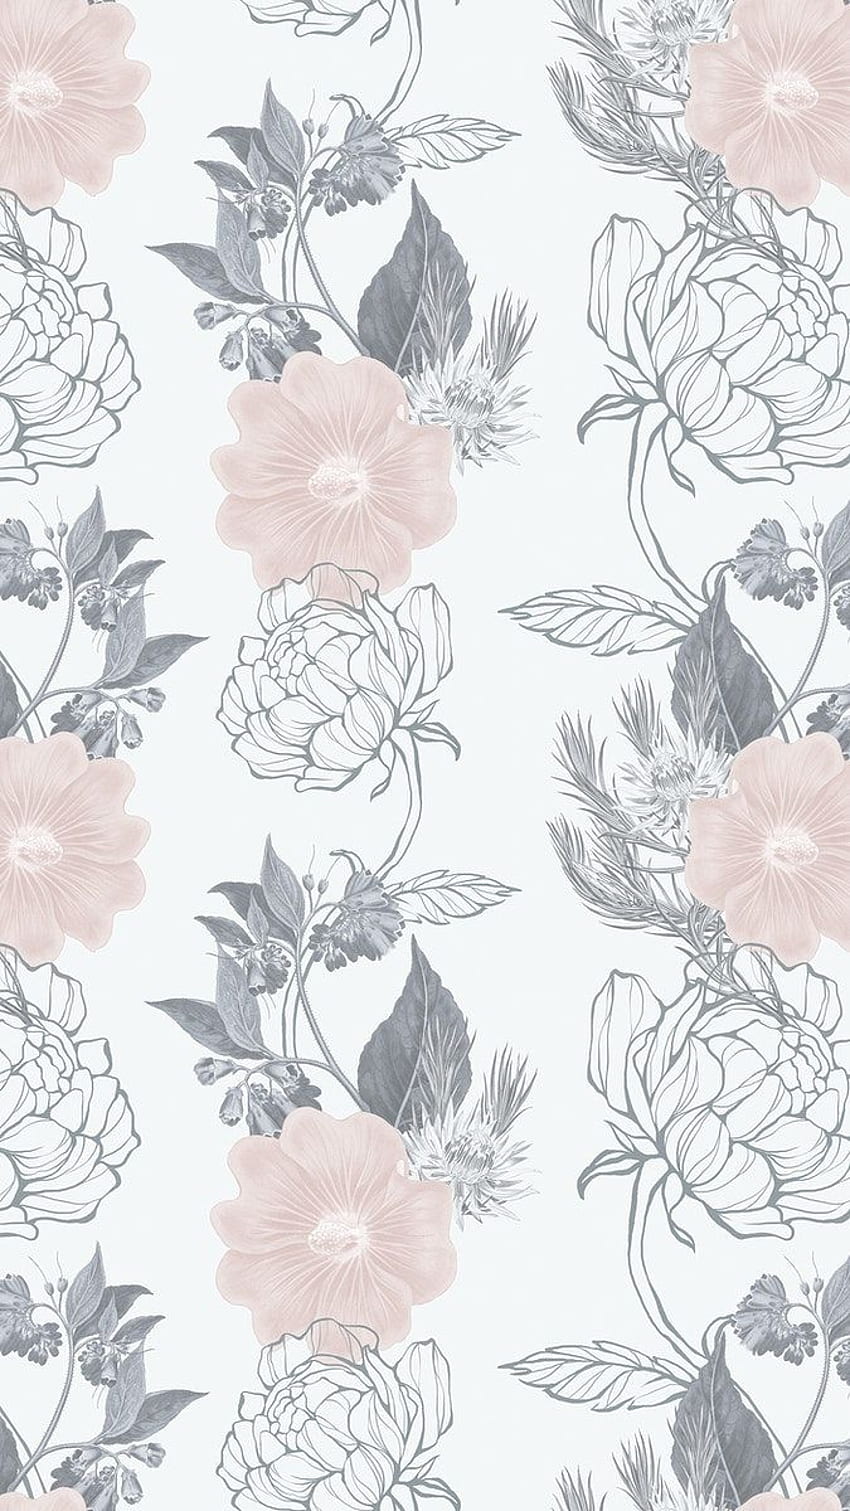 Calico Floral  921100  Arthouse  Wallpaper UK